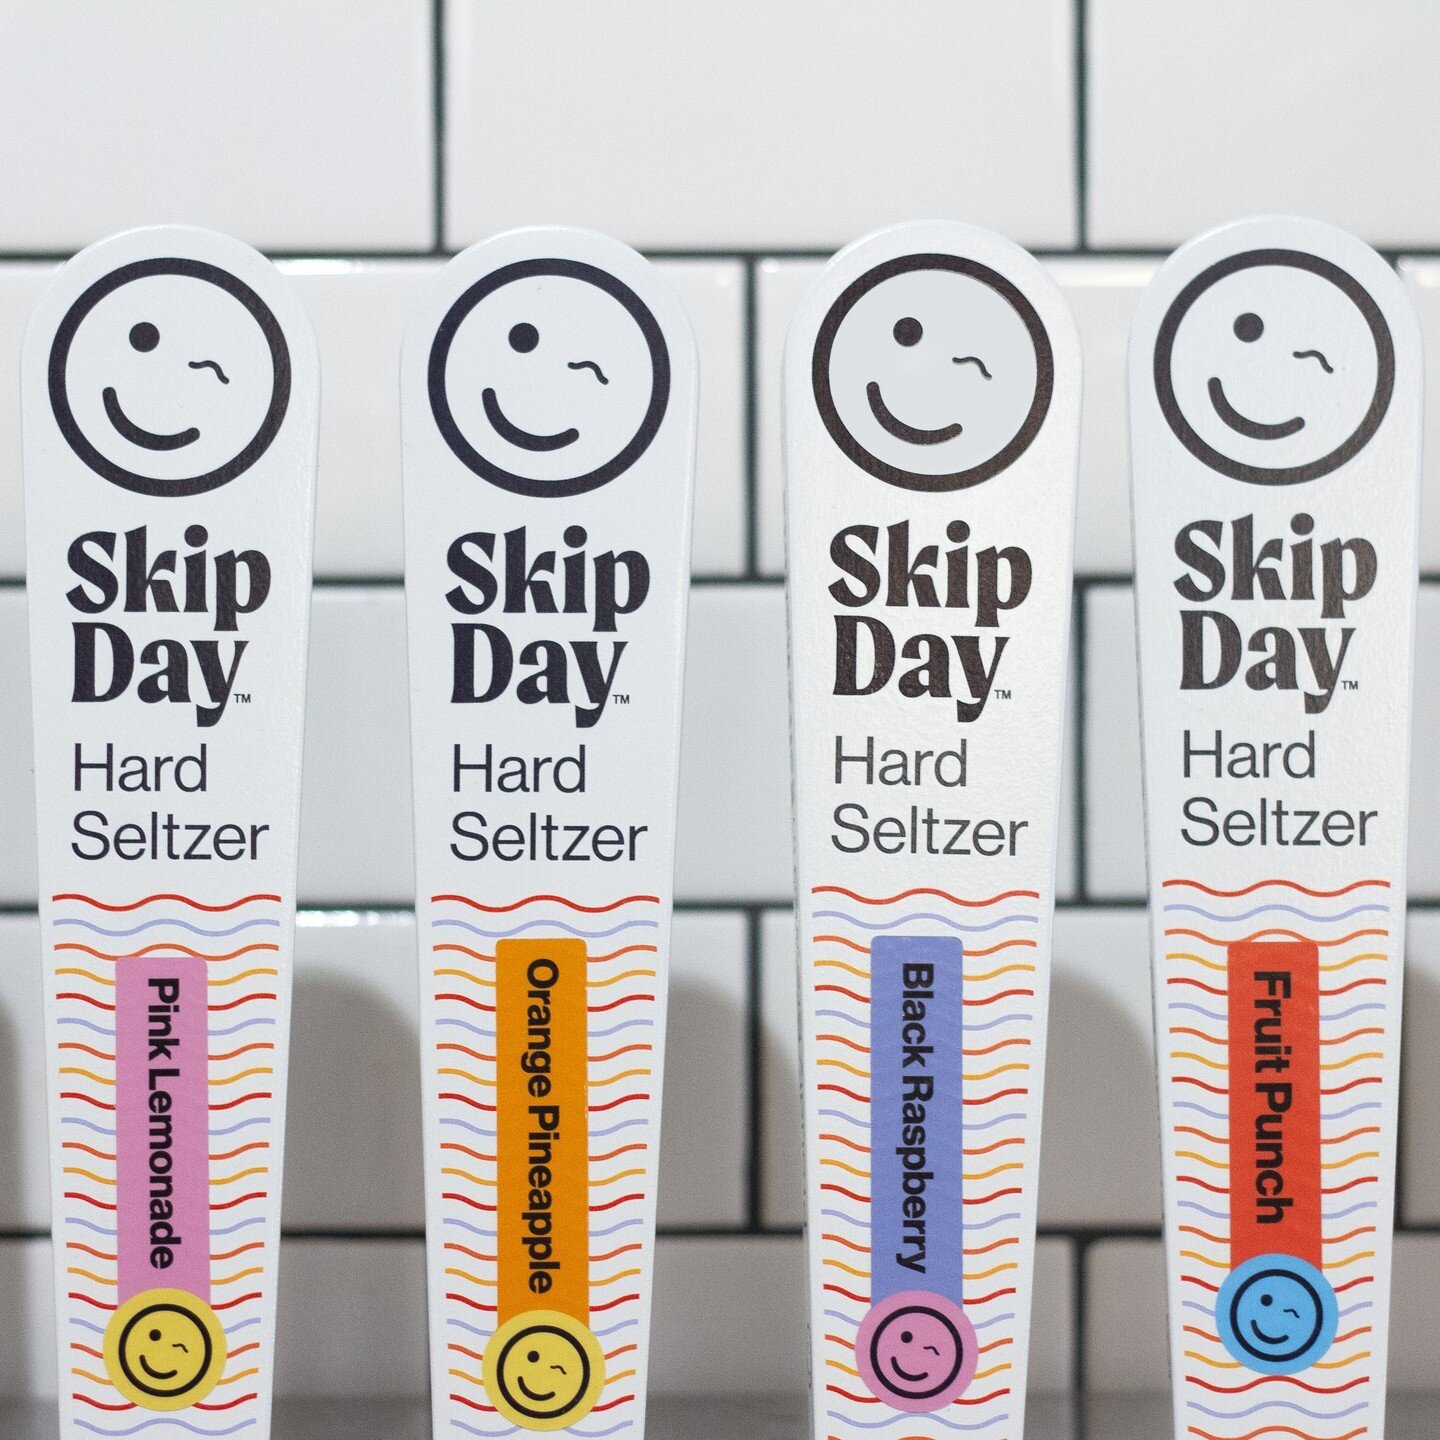 Have you tried Skip Day on tap? It's a whole different ✨ drinking experience ✨ If you want to give it a try, ask your favorite watering hole to help spread some of the love 😉
_______
#hardseltzer #drinkskipday #ontap